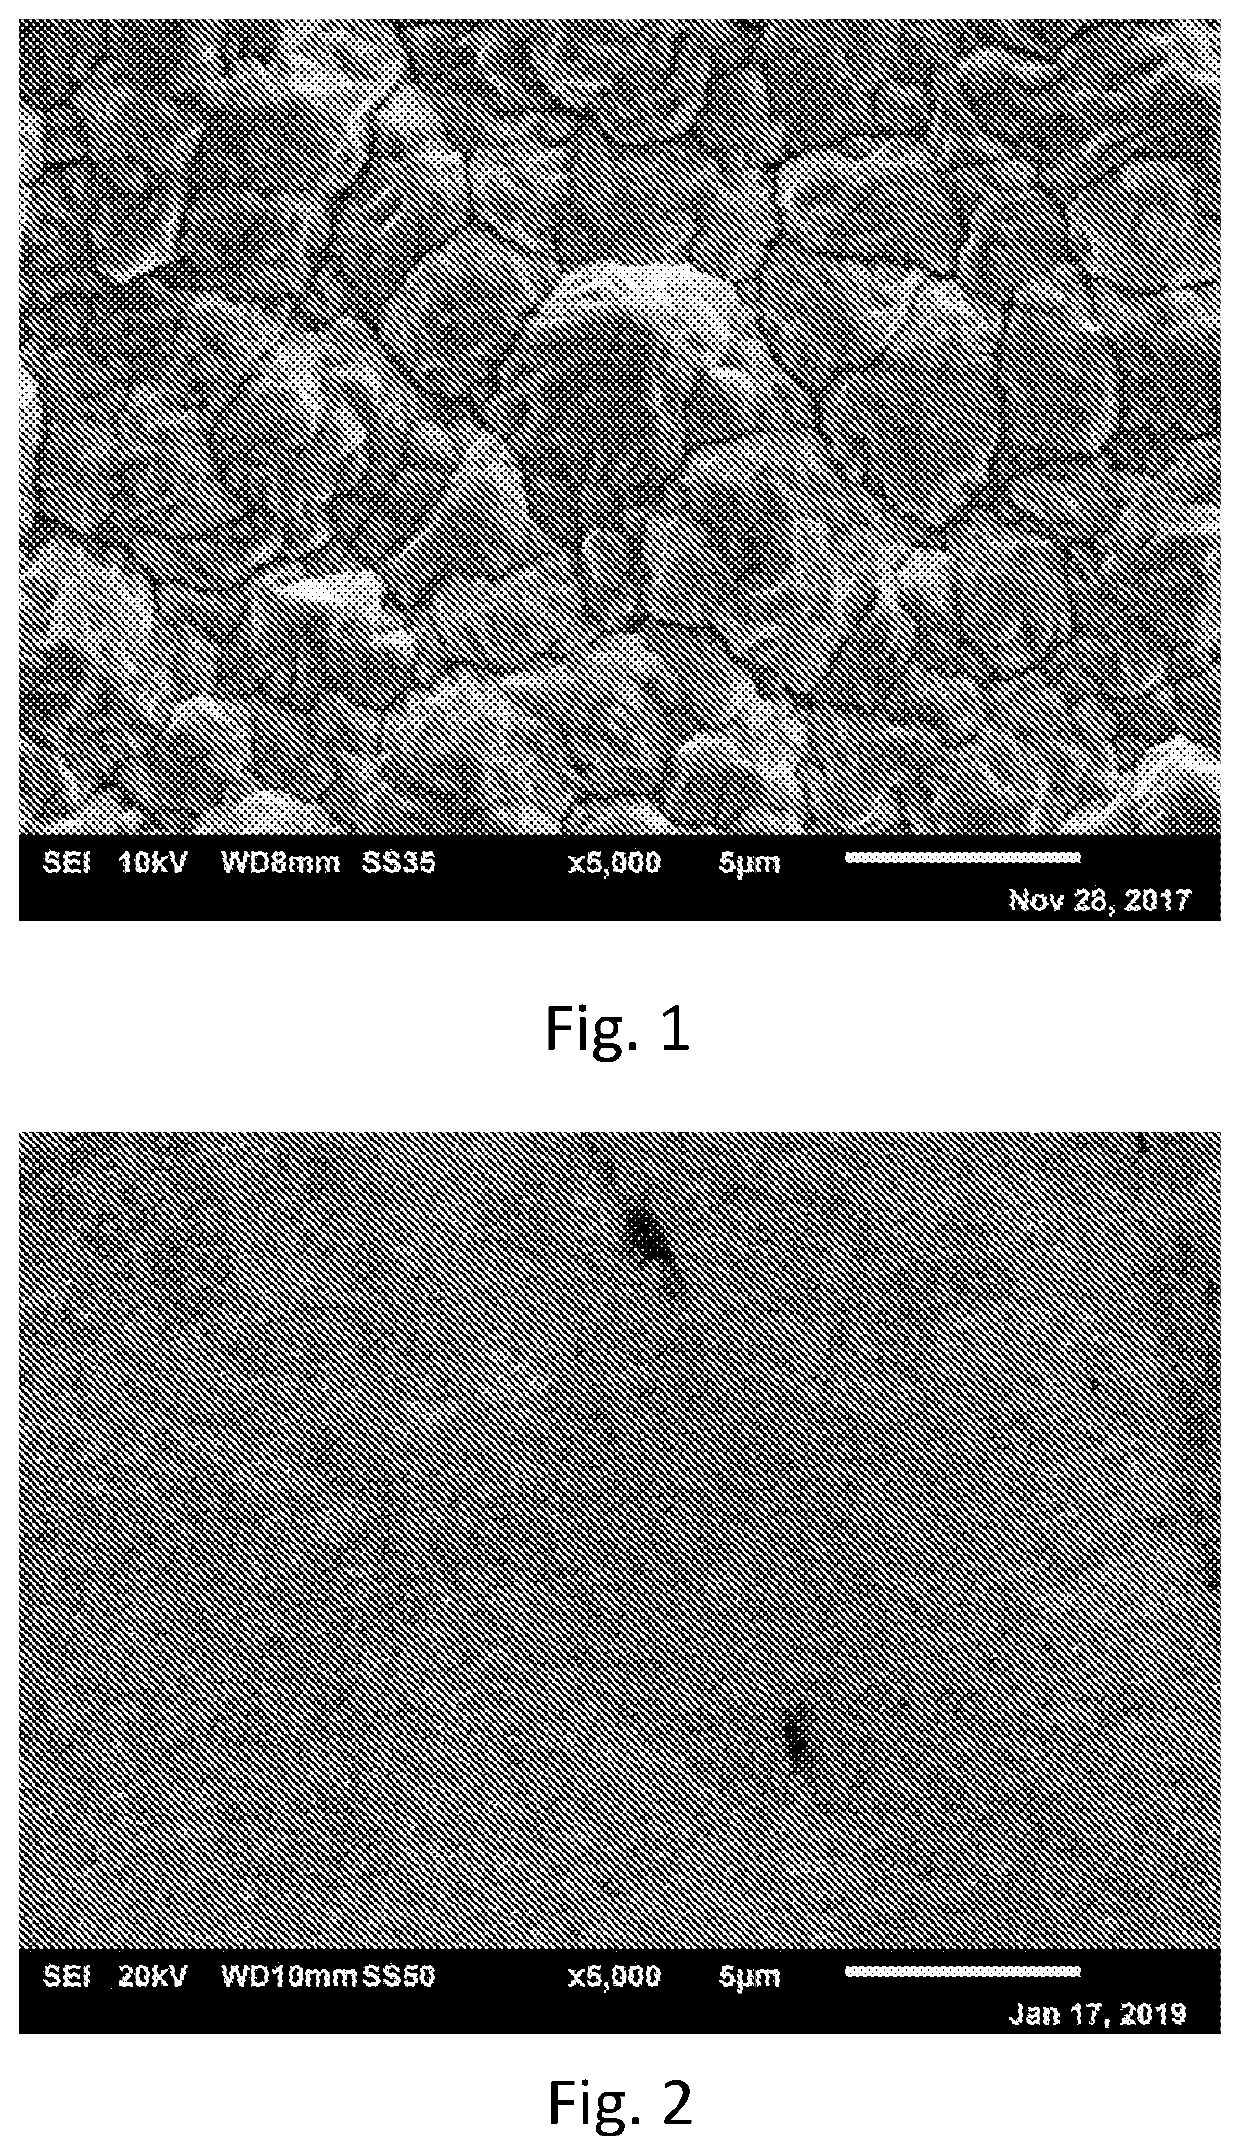 Silicon composition material for use as battery anode